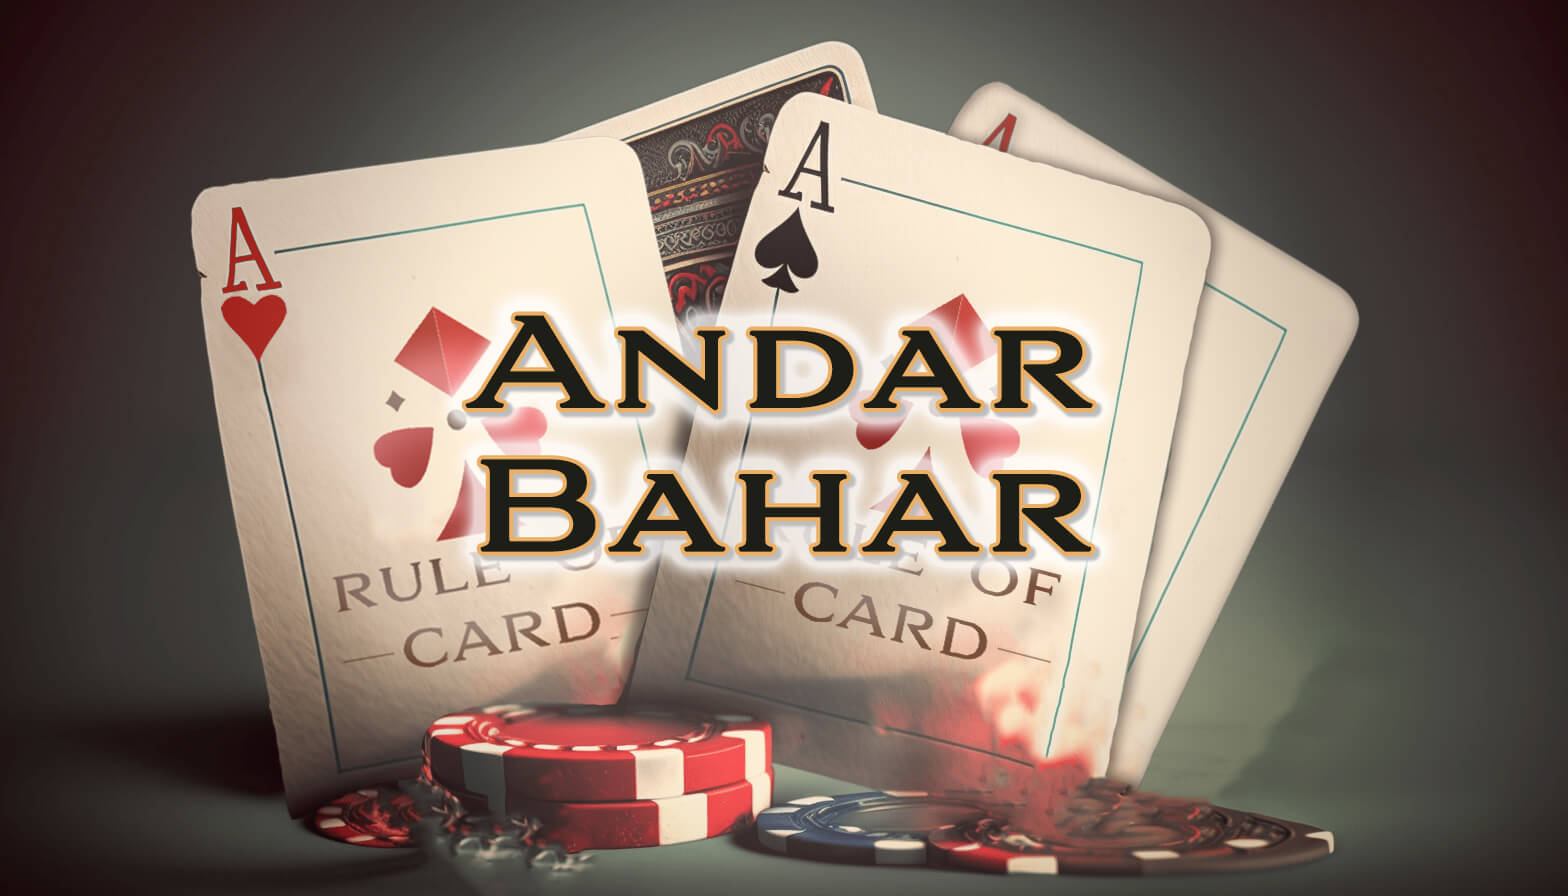 Playing the card game Andar Bahar